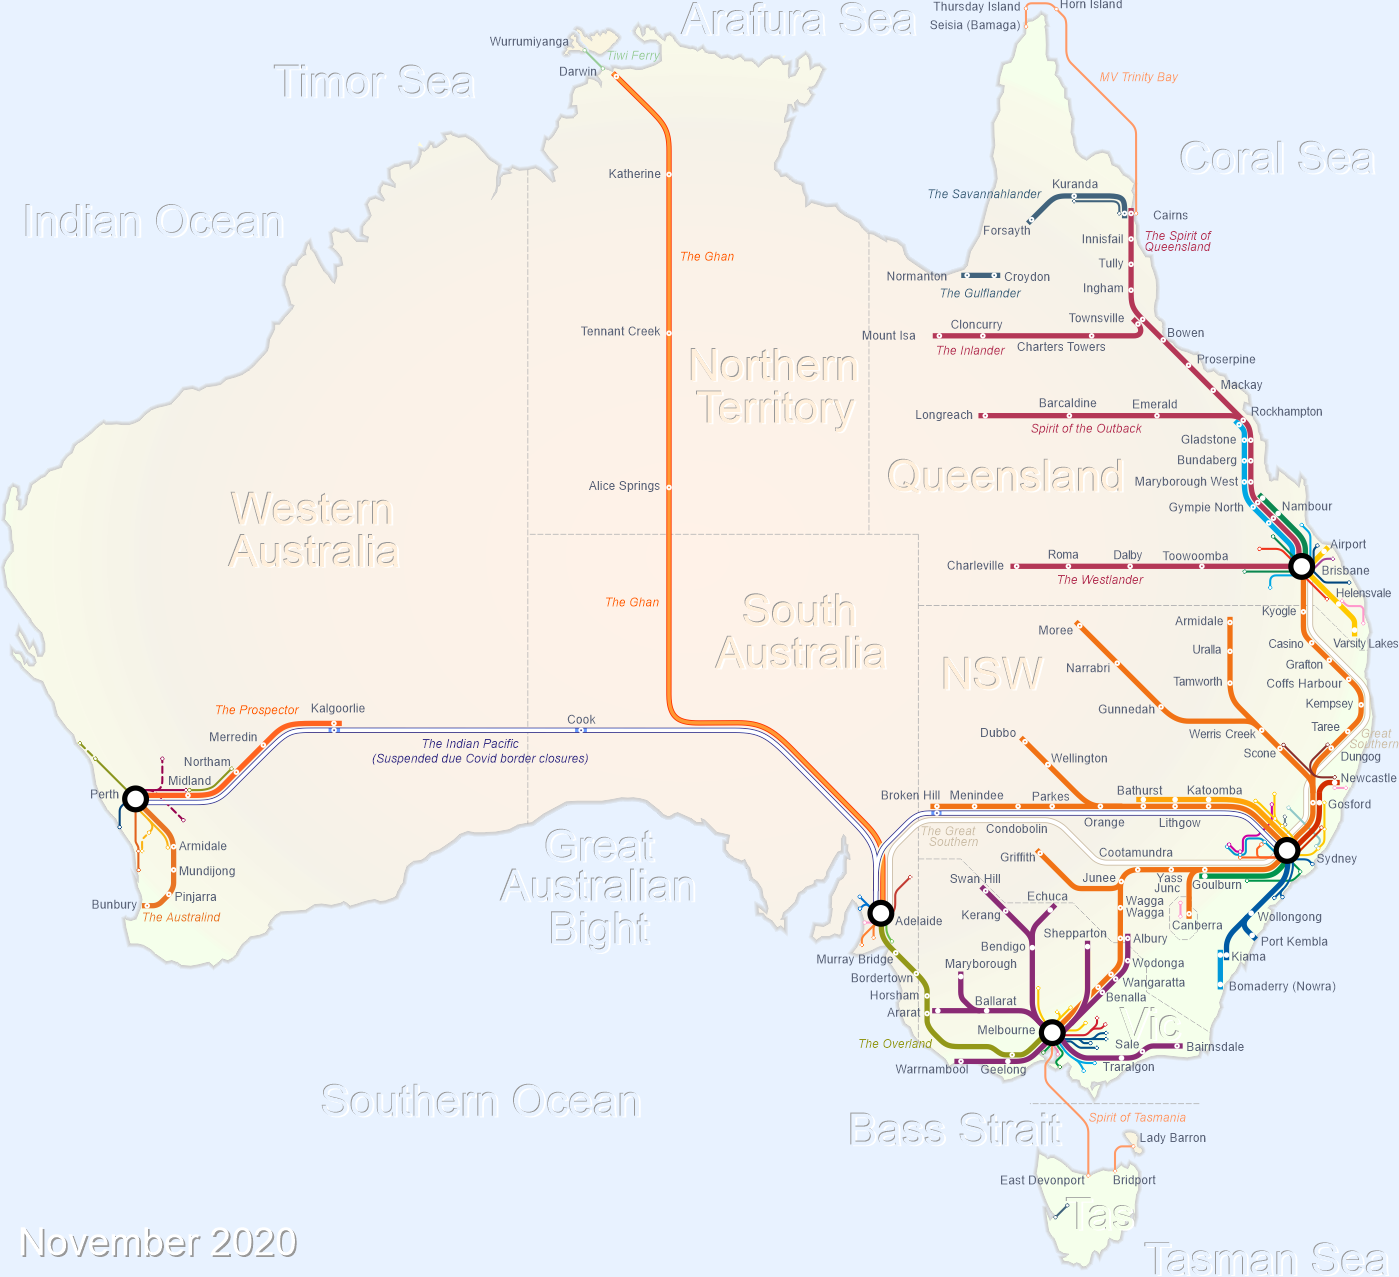 Colourful map of Australia showing all states and